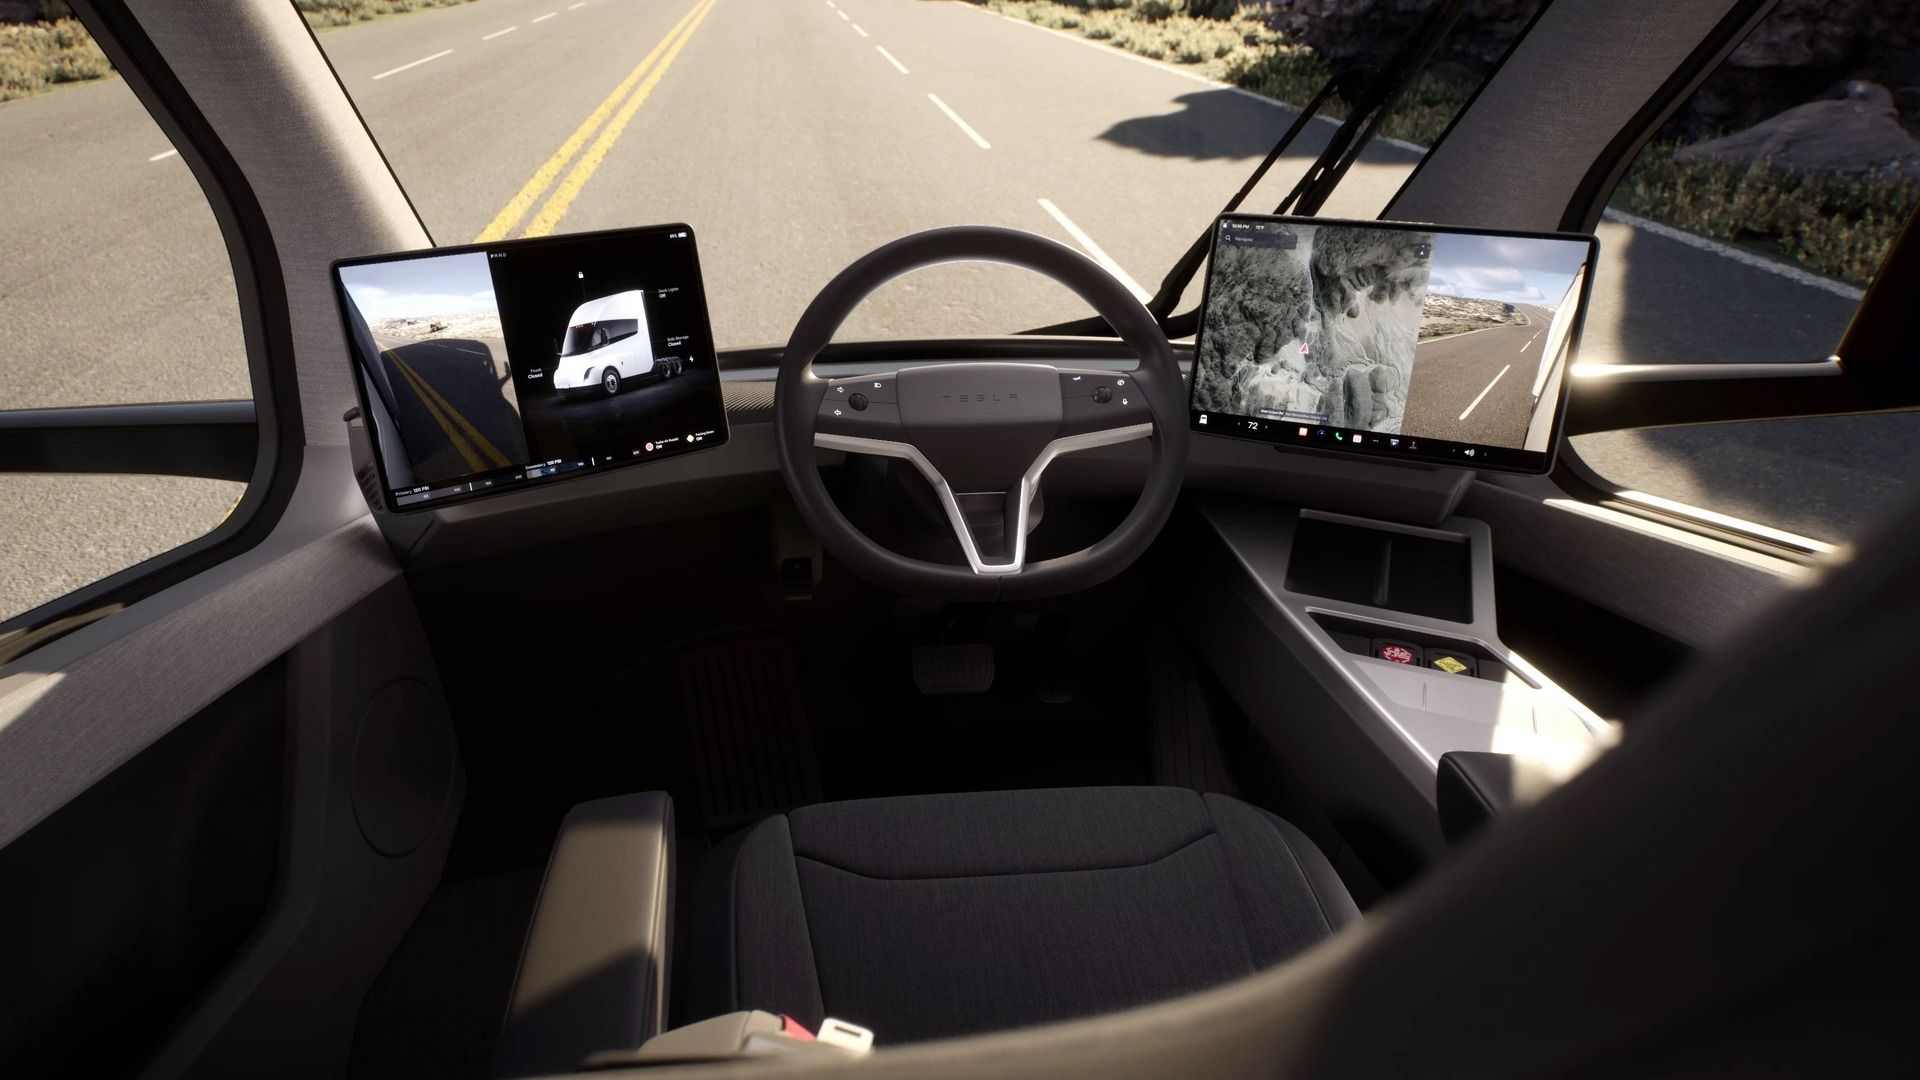 The Tesla SEMI interior featuring screens on the right and left of the central driving position